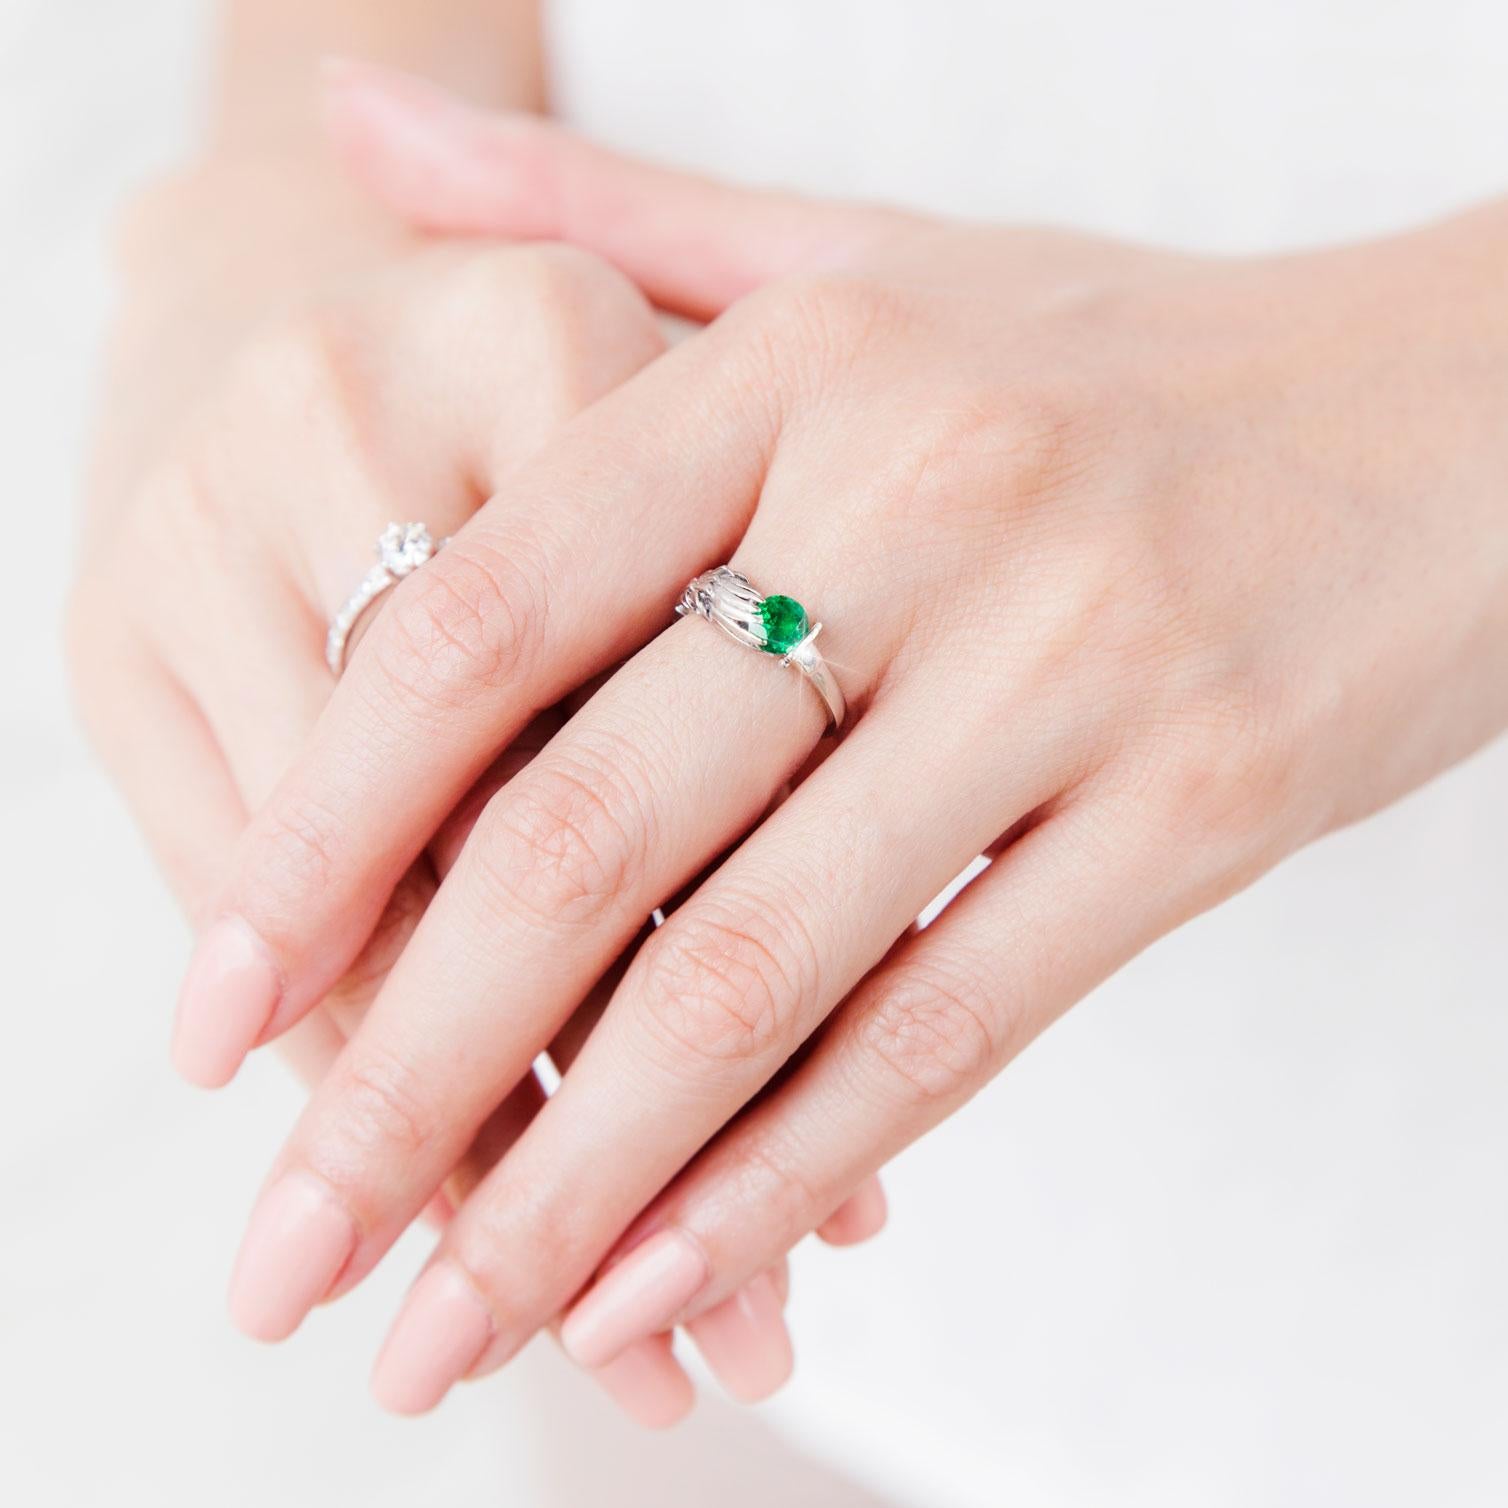 Forged in platinum, this vintage emerald ring is empowered with fantasy. The Yuna Fantasy Ring sees a mythical feathered wing sweeping up one side of the ring, ending in a set of fierce claws and grasping at a magical natural green emerald,